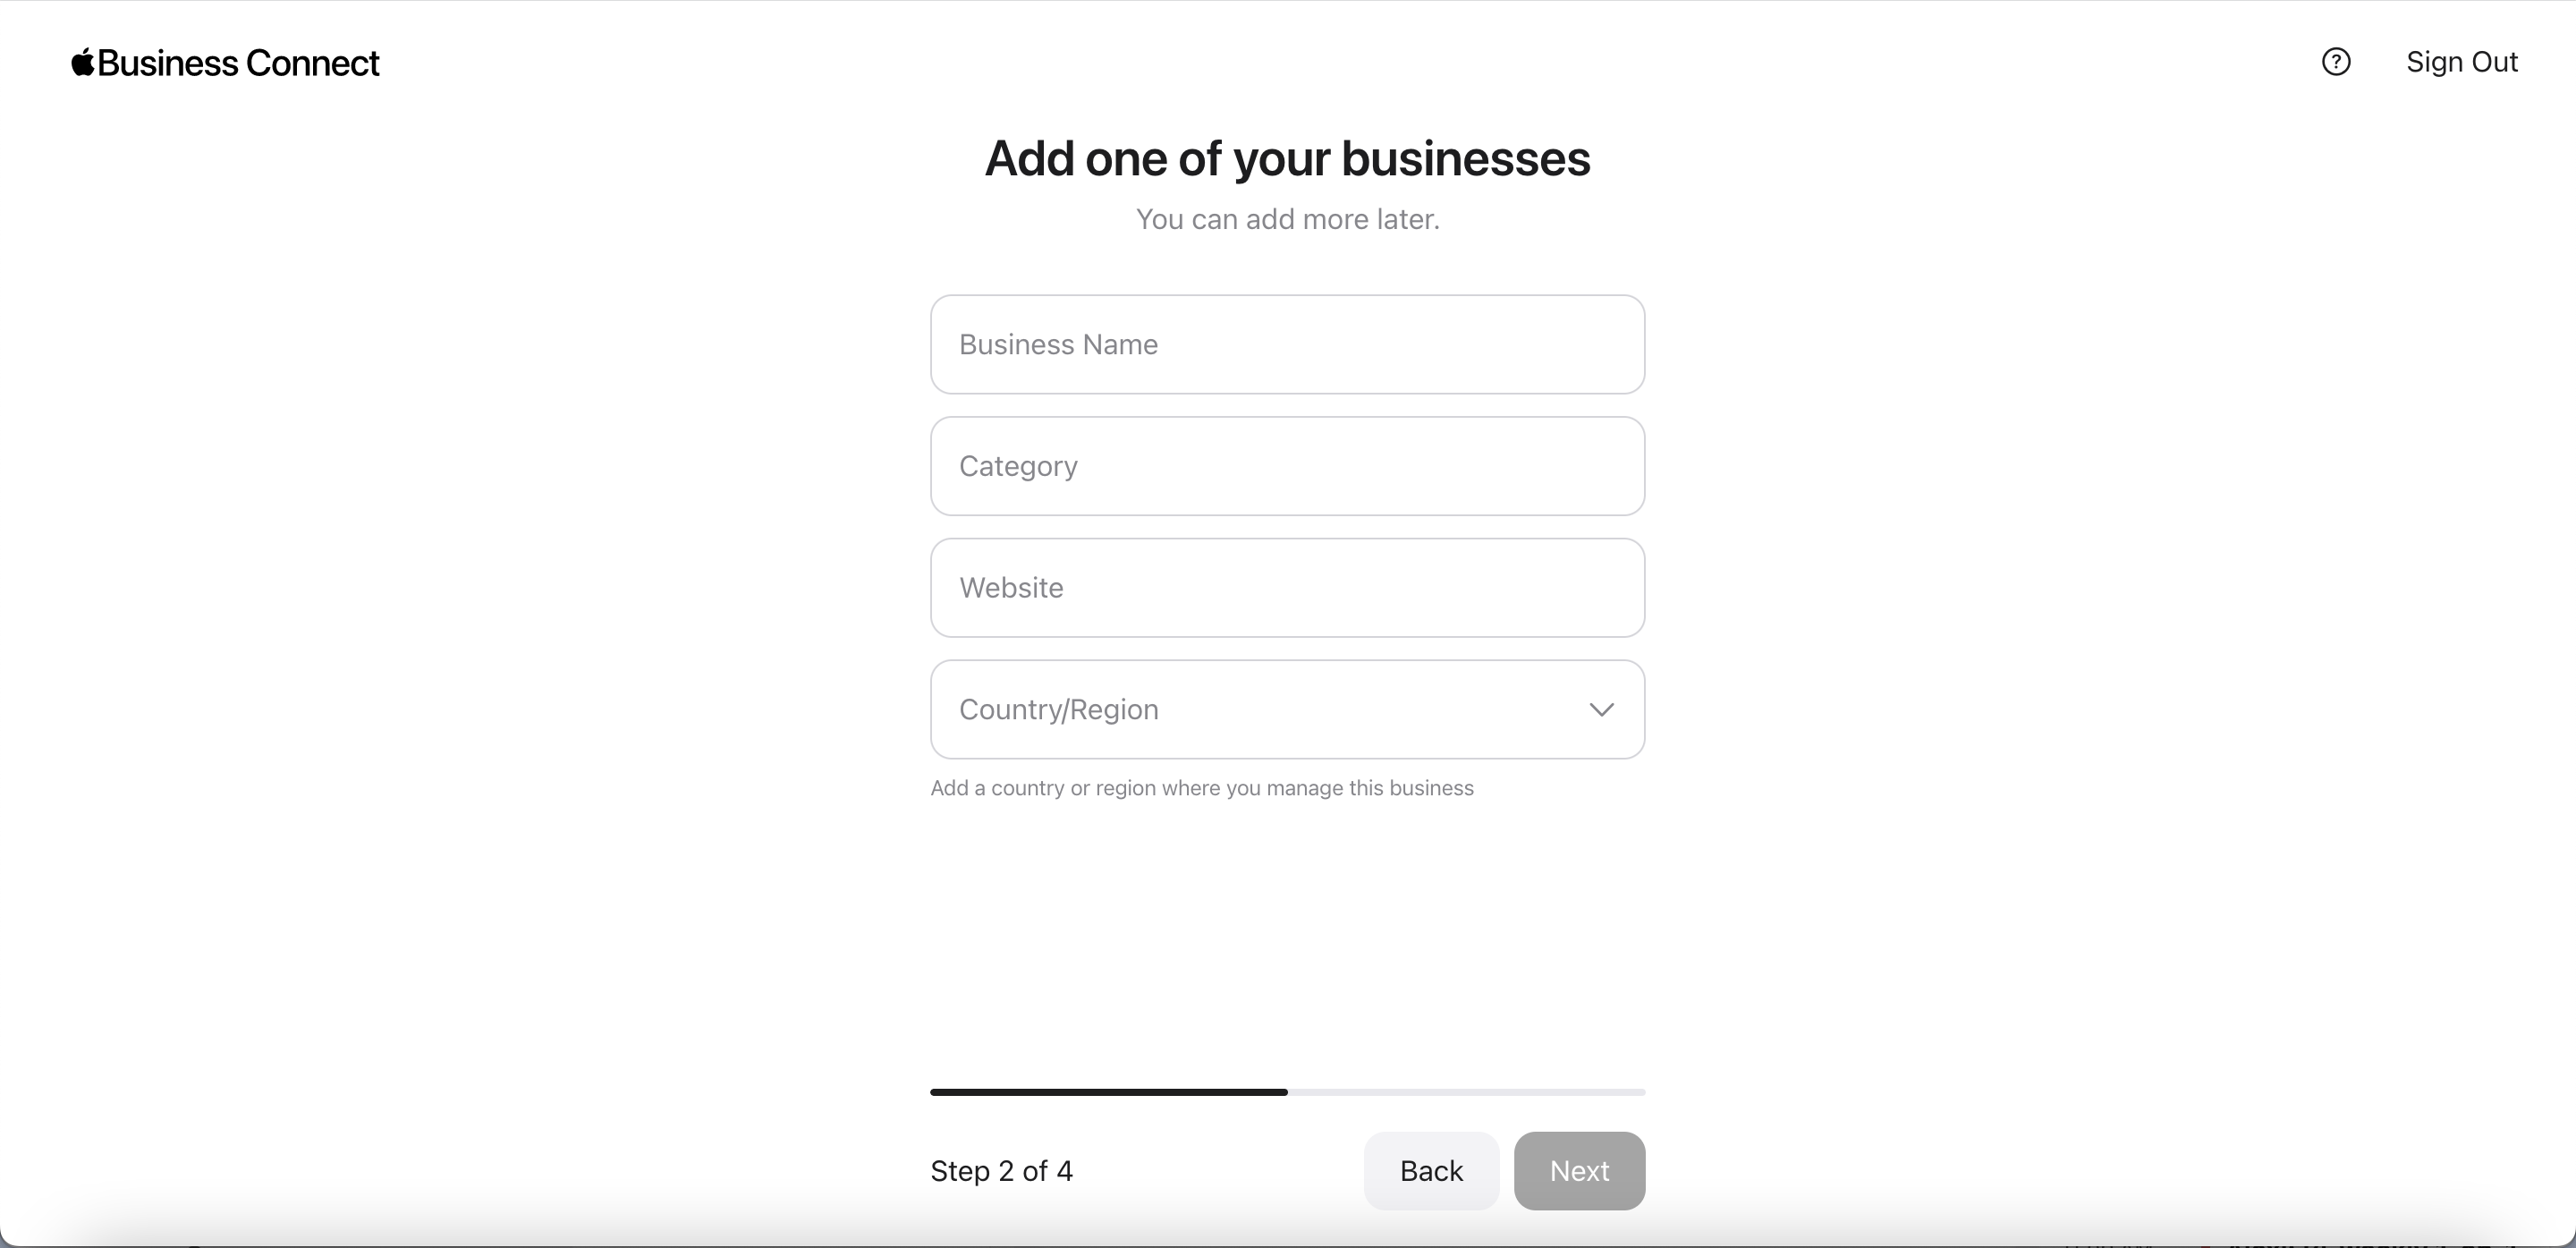 Screenshot of step 2 for Apple Business Connect Enterprise account with fields for business name, category, website, and country